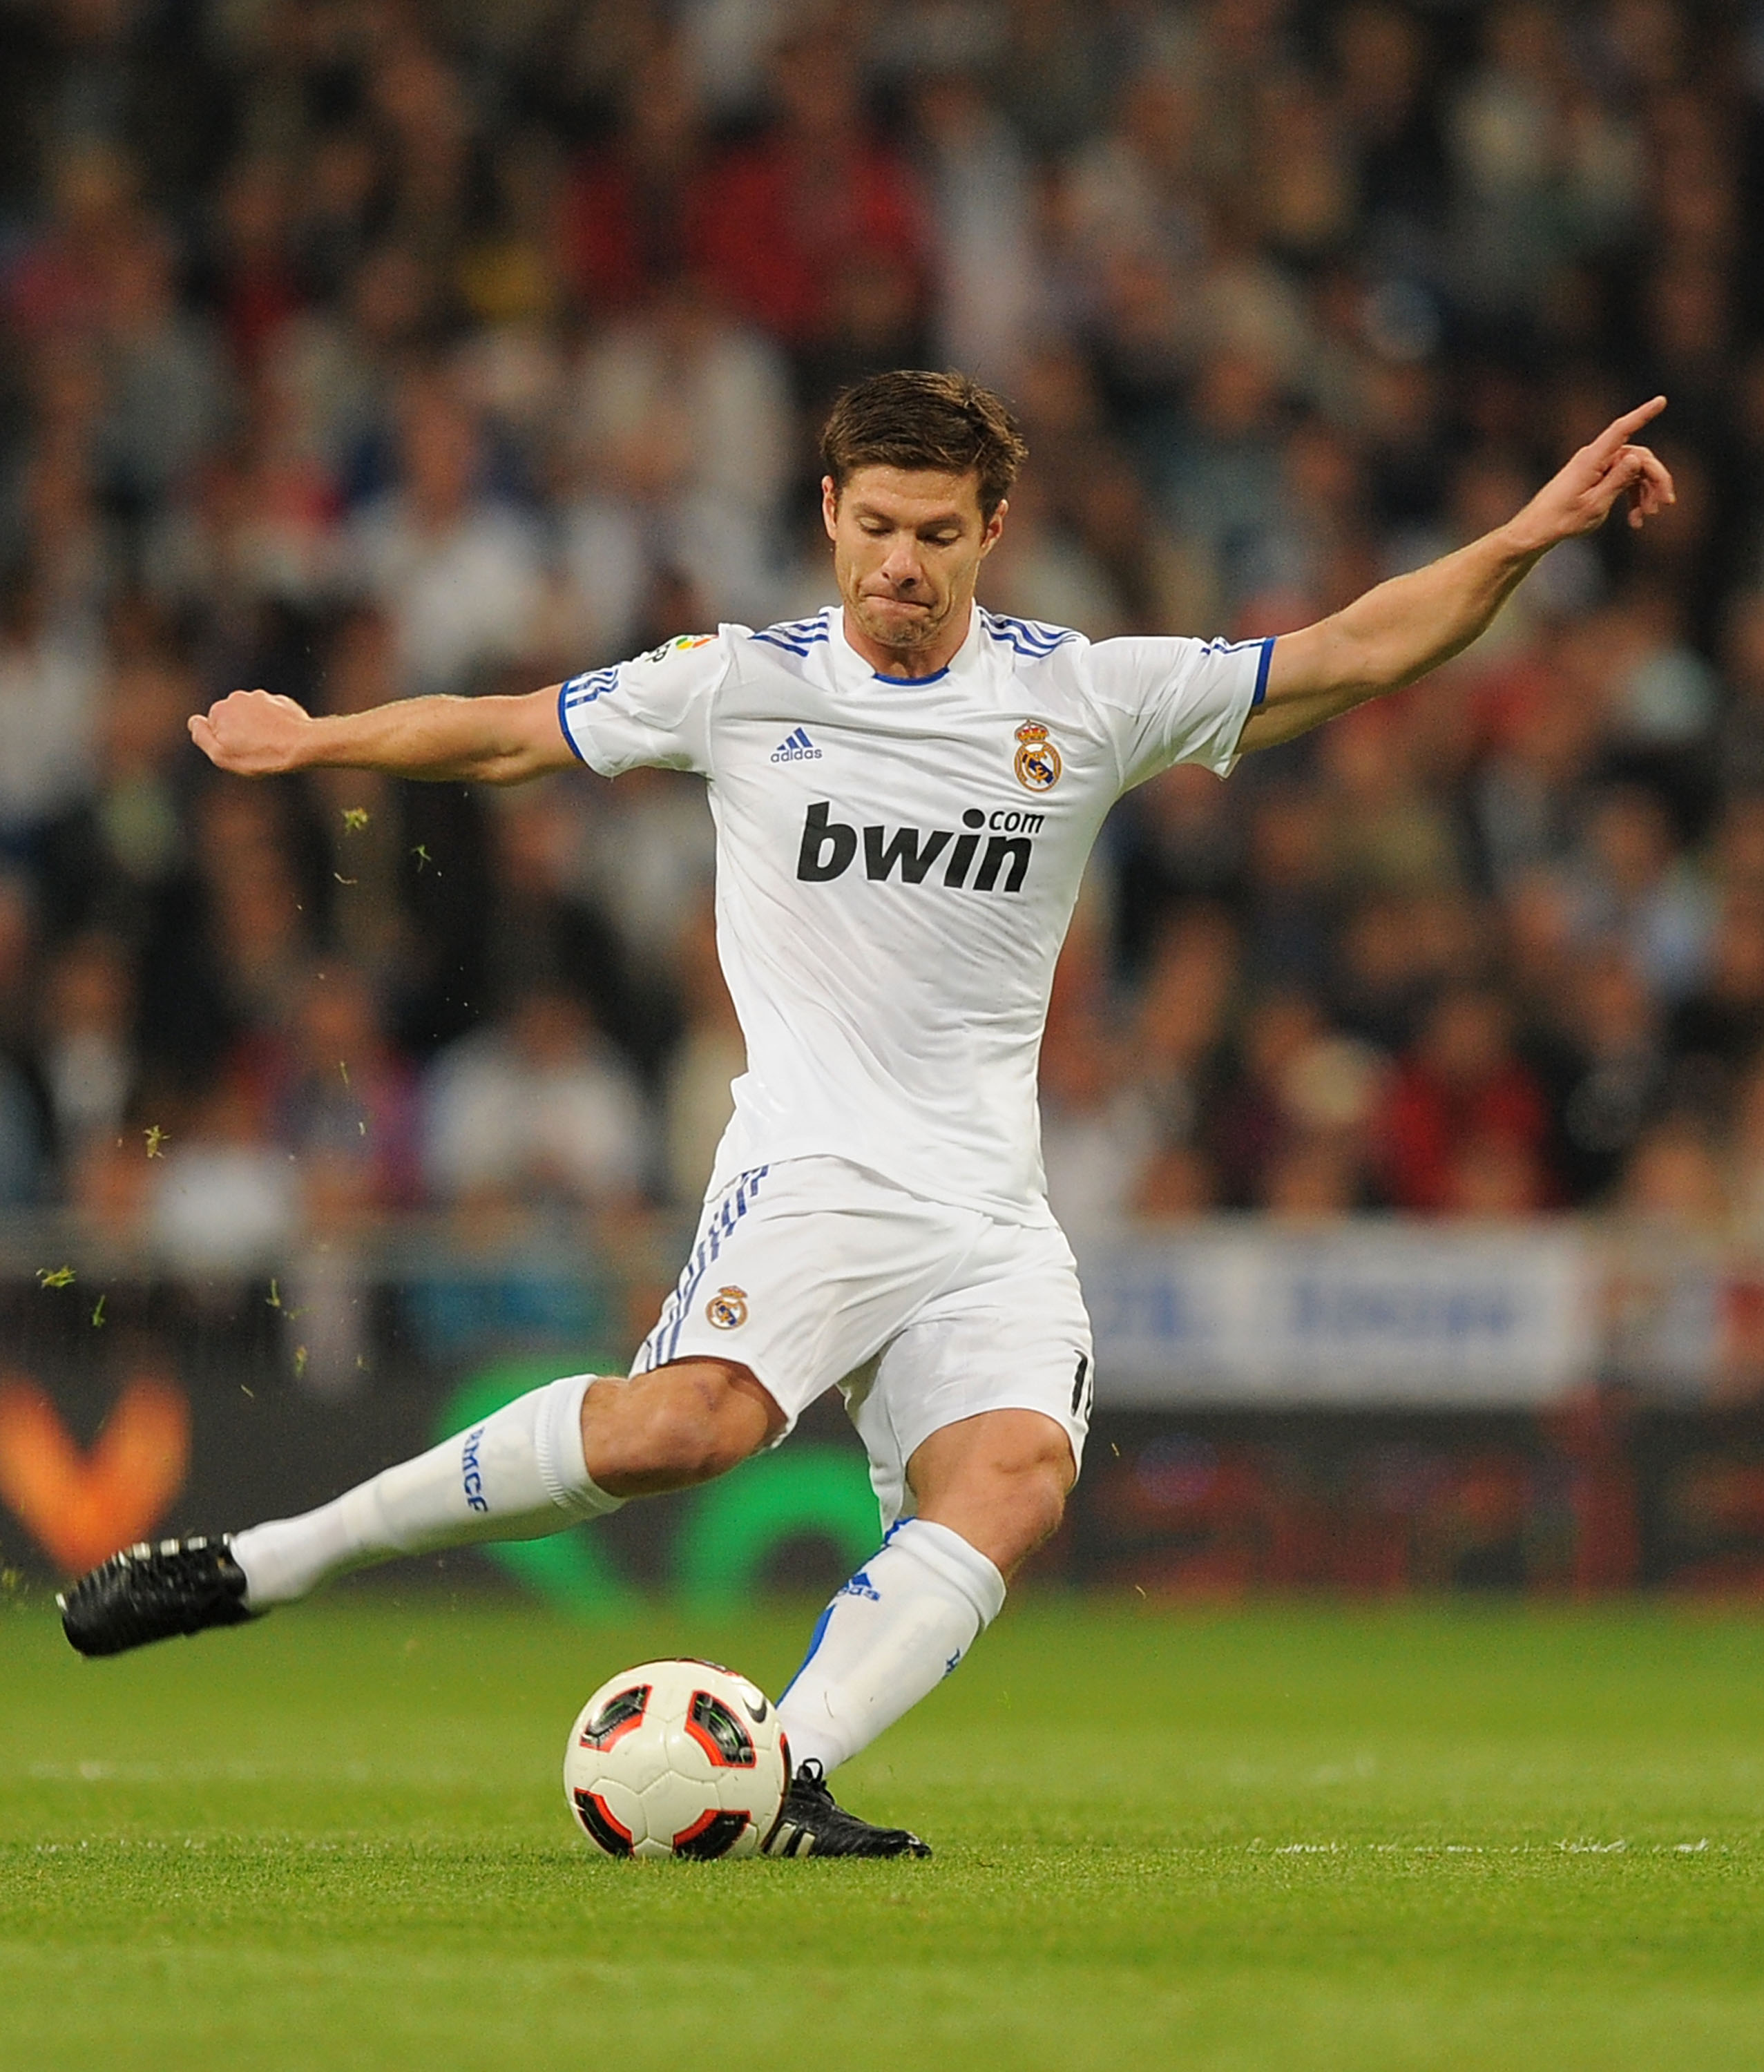 MADRID, SPAIN - OCTOBER 23: Xabi Alonso of Real Madrid in action during the La Liga match between Real Madrid and Racing Santander at Estadio Santiago Bernabeu on October 23, 2010 in Madrid, Spain.  (Photo by Denis Doyle/Getty Images)